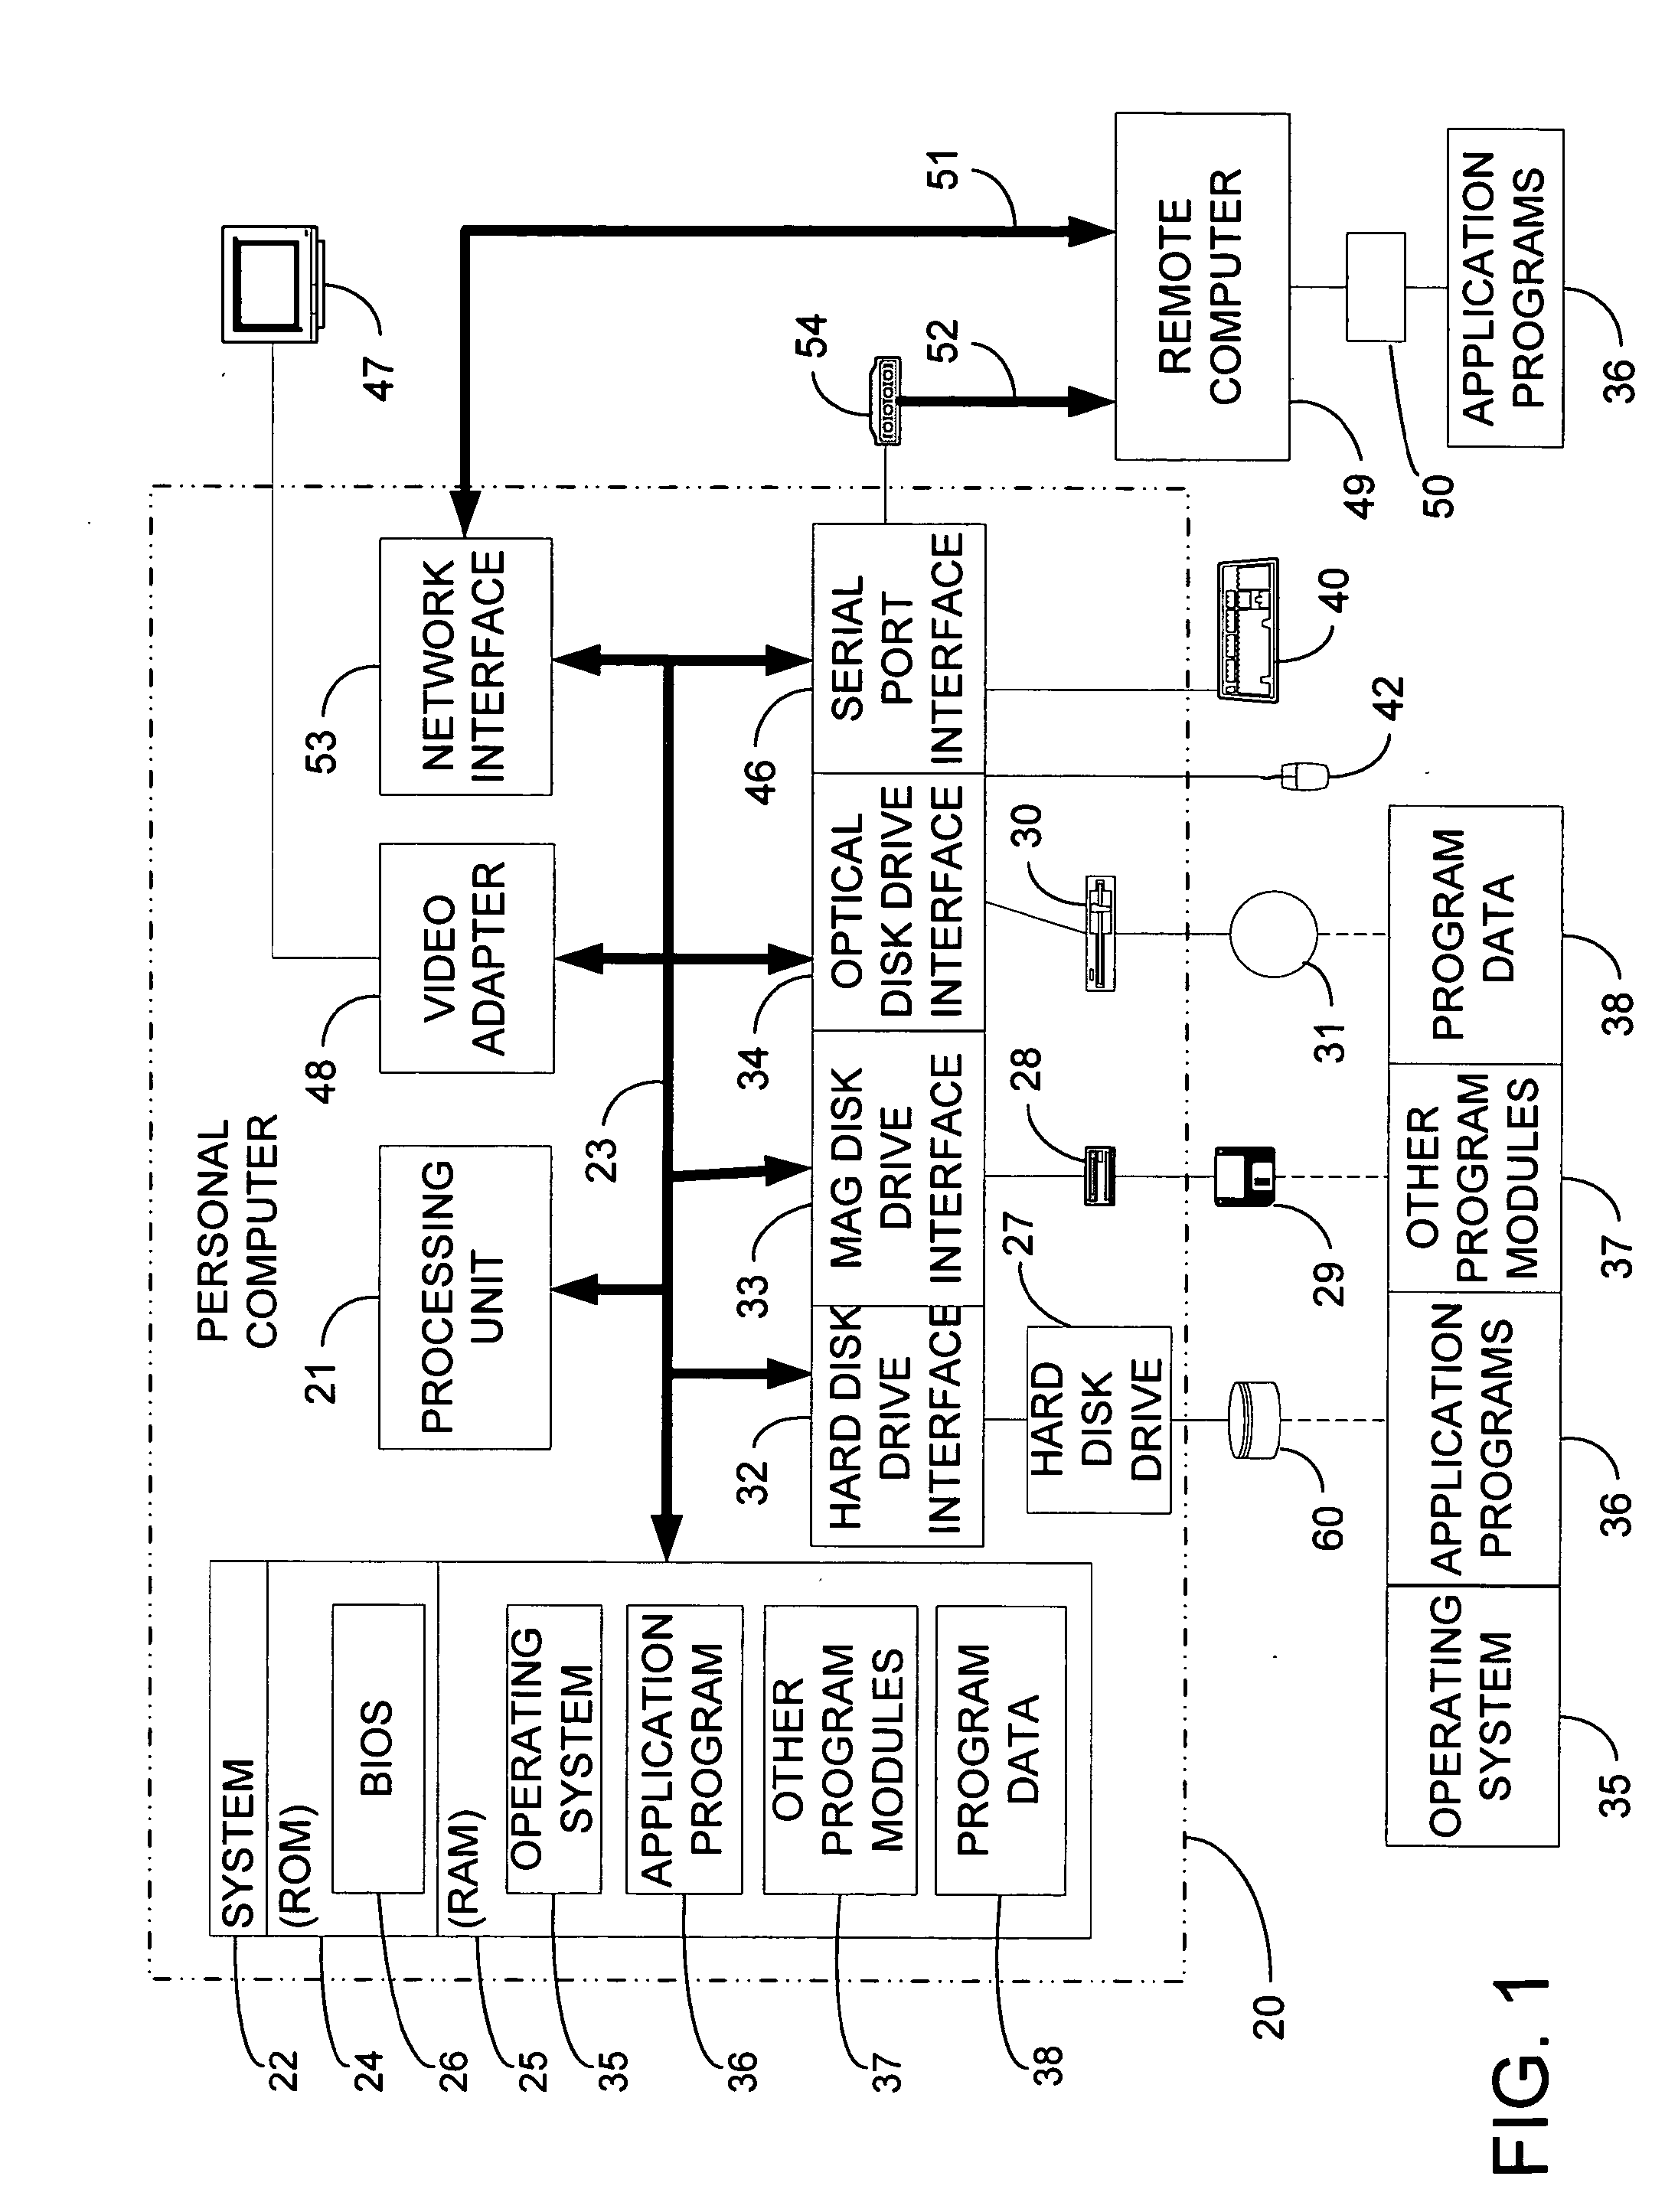 Application programming interface and generalized network address translation for translation of transport layer sessions